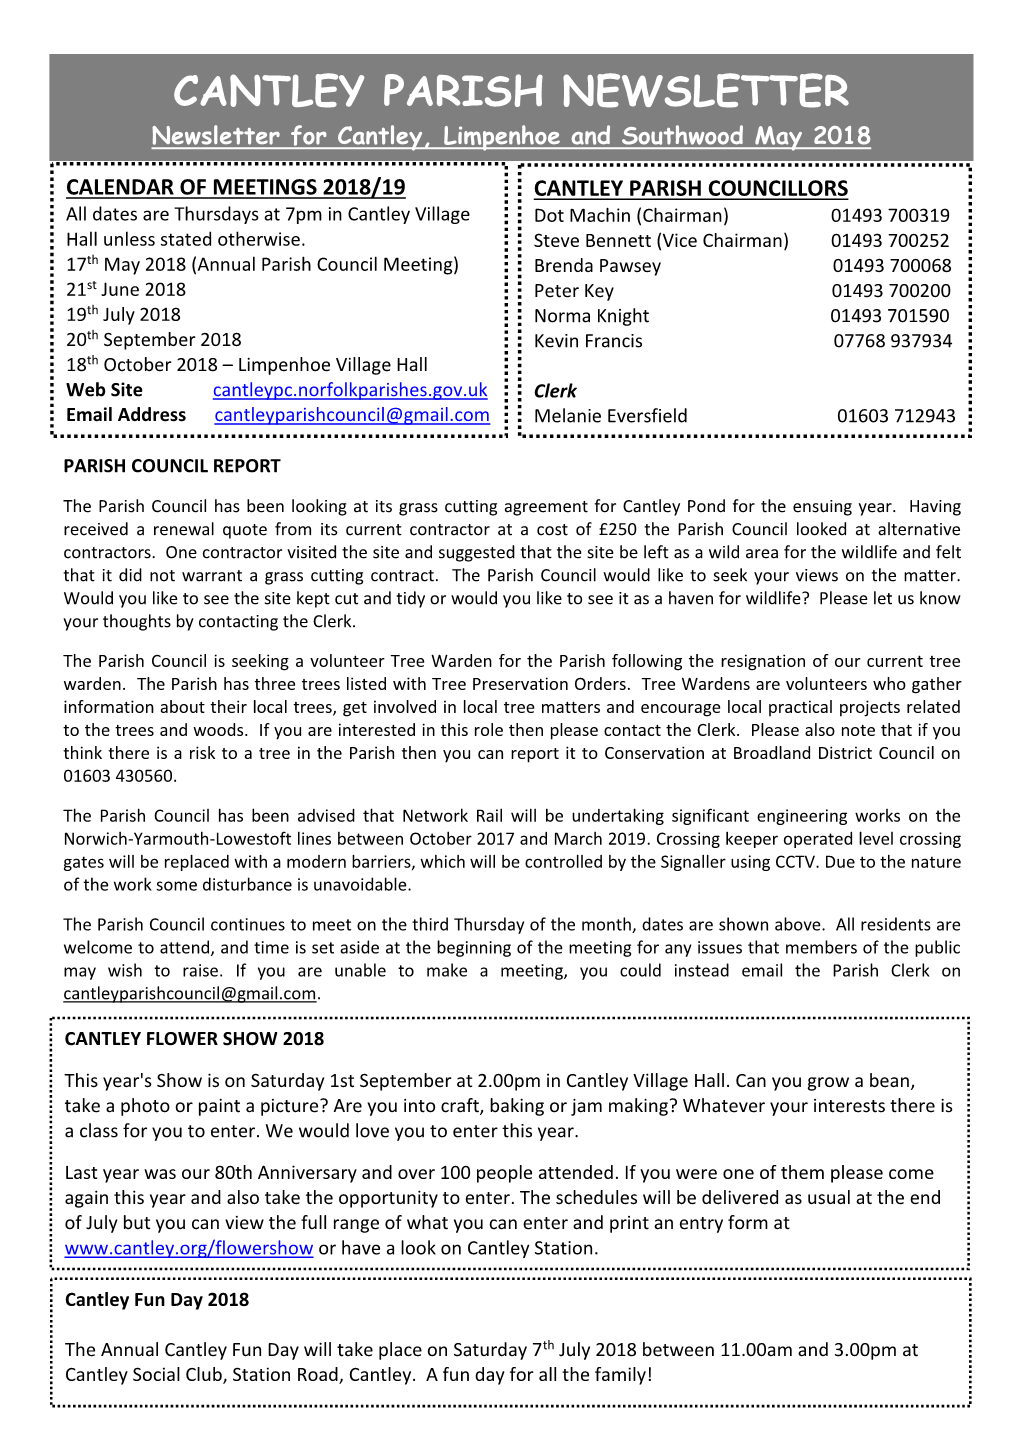 CANTLEY PARISH NEWSLETTER Newsletter for Cantley, Limpenhoe and Southwood May 2018